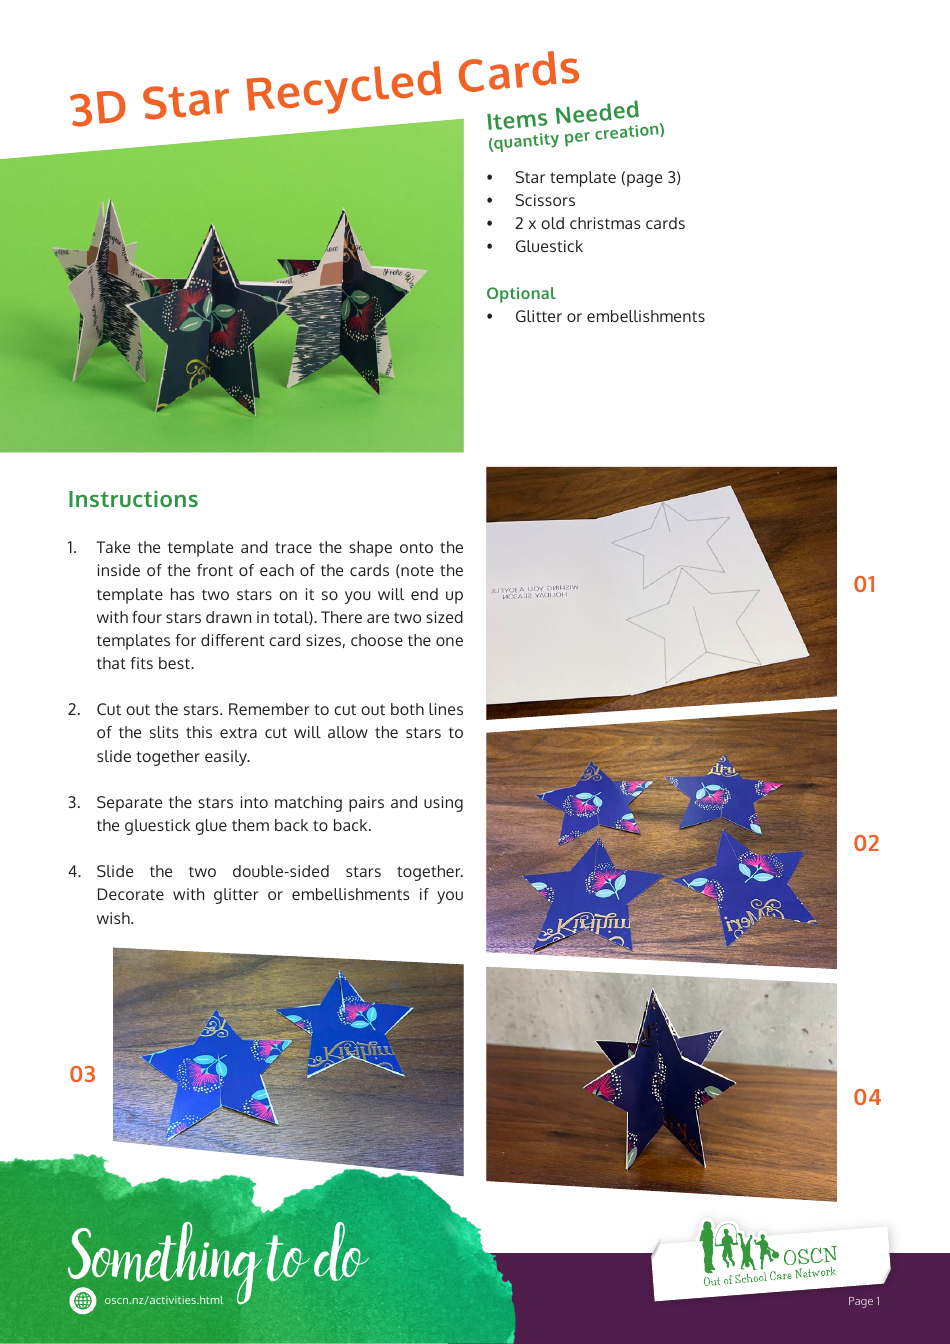 Preview of 3D Star Recycled Card Templates. Decorative, eco-friendly card templates in the shape of stars for various occasions.